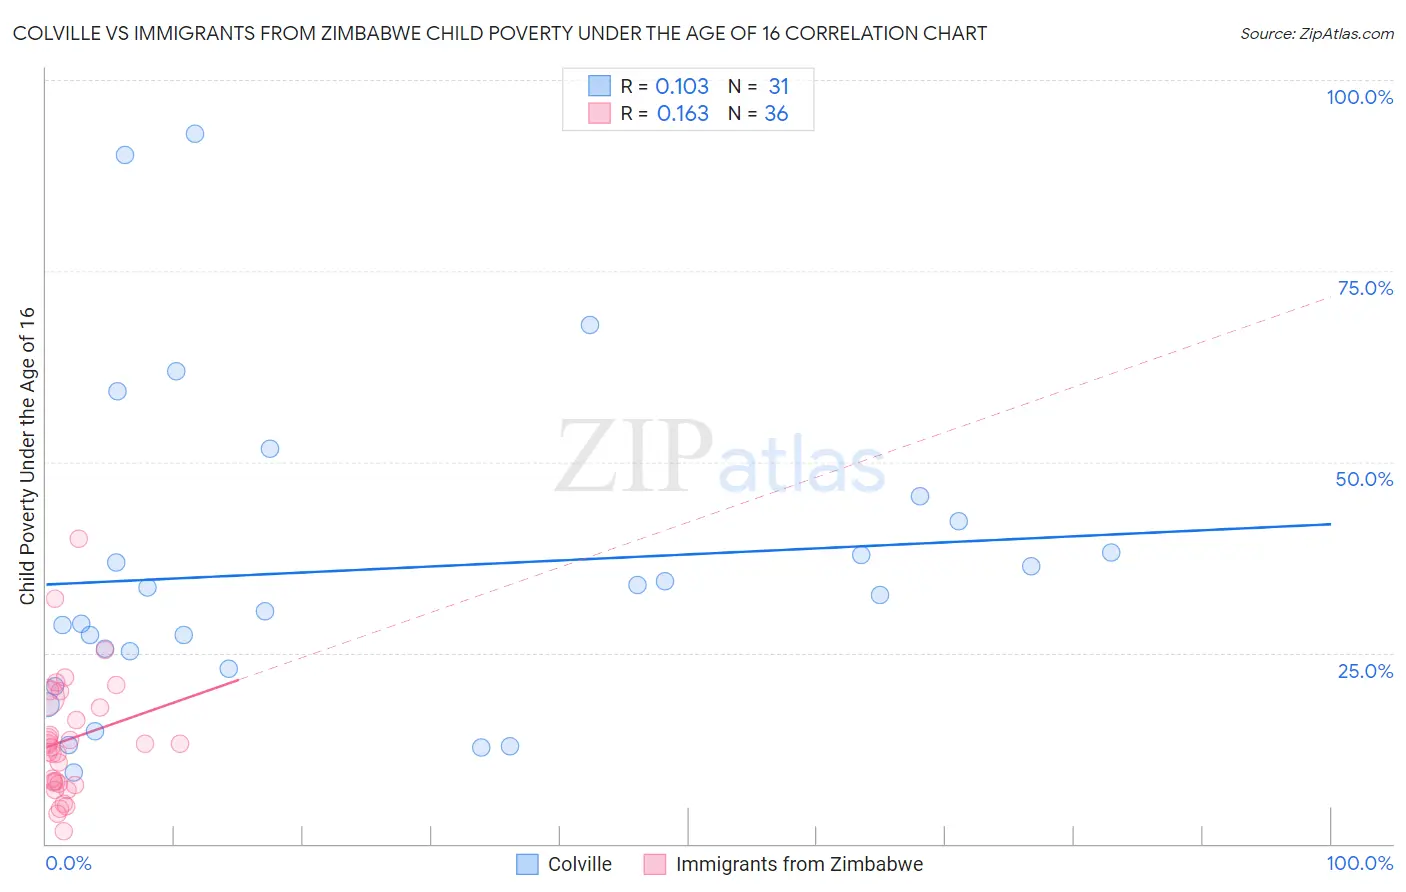 Colville vs Immigrants from Zimbabwe Child Poverty Under the Age of 16